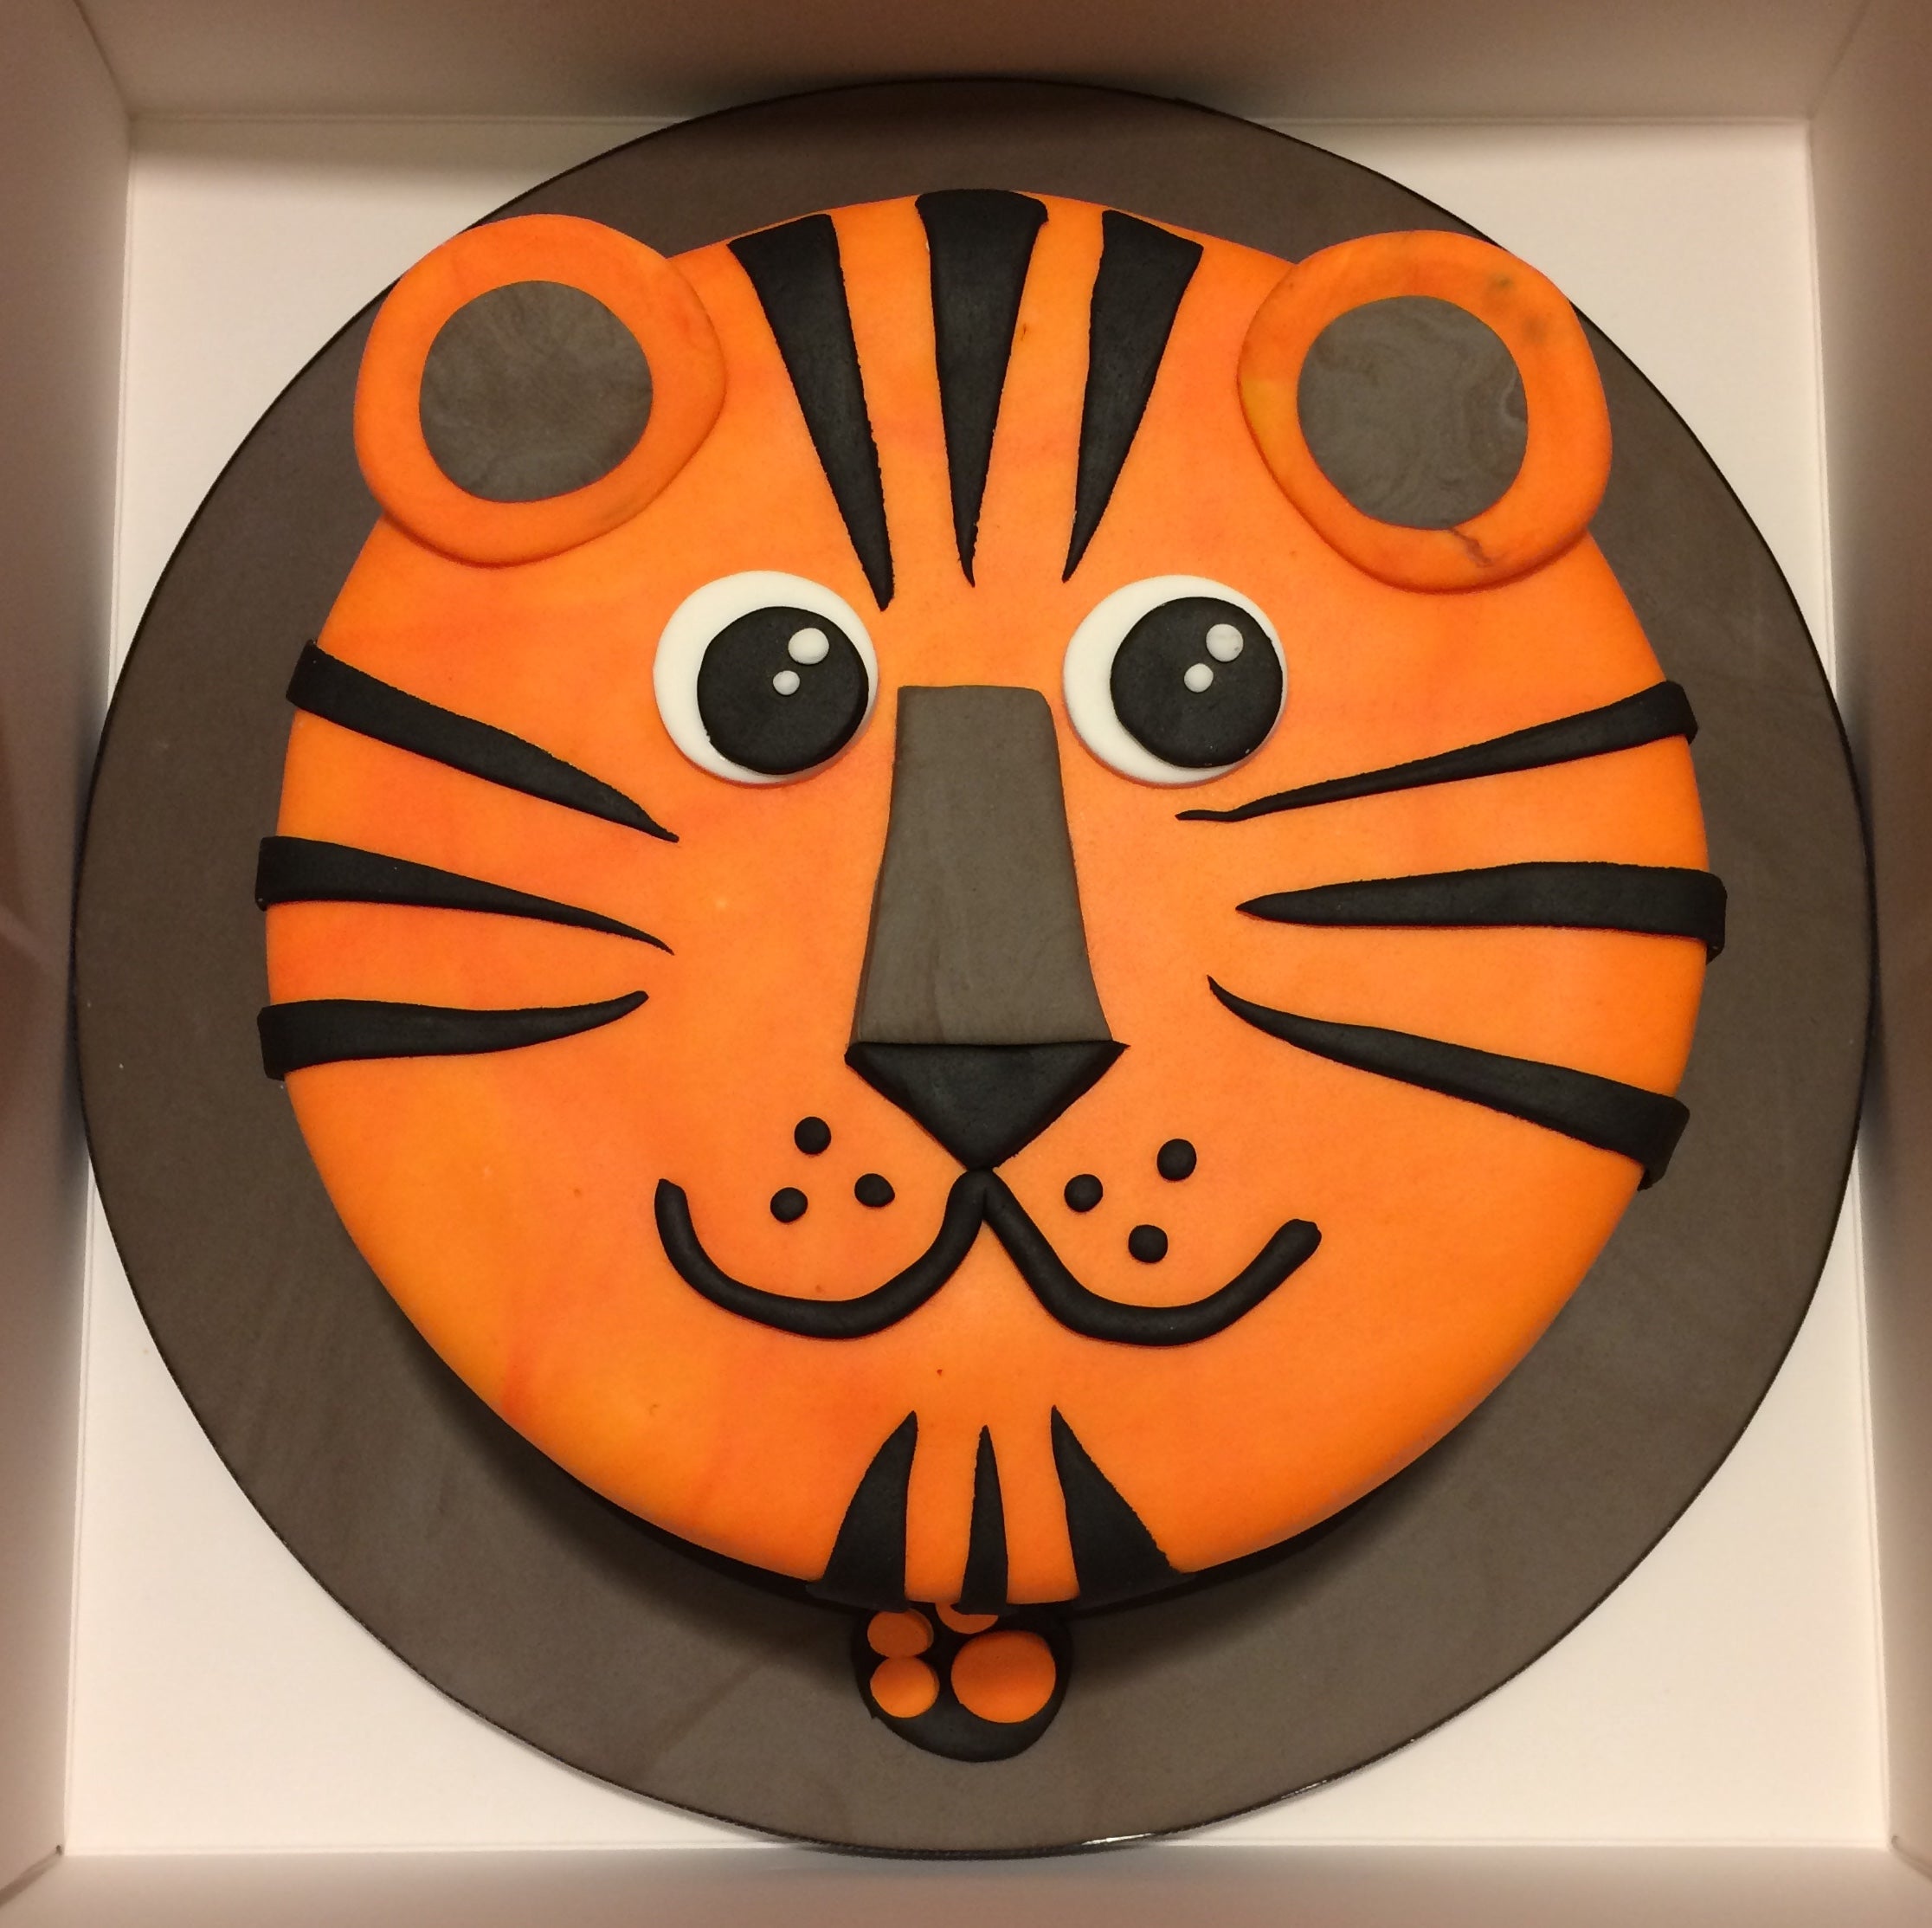 How to Make a Tiger Cake - YouTube